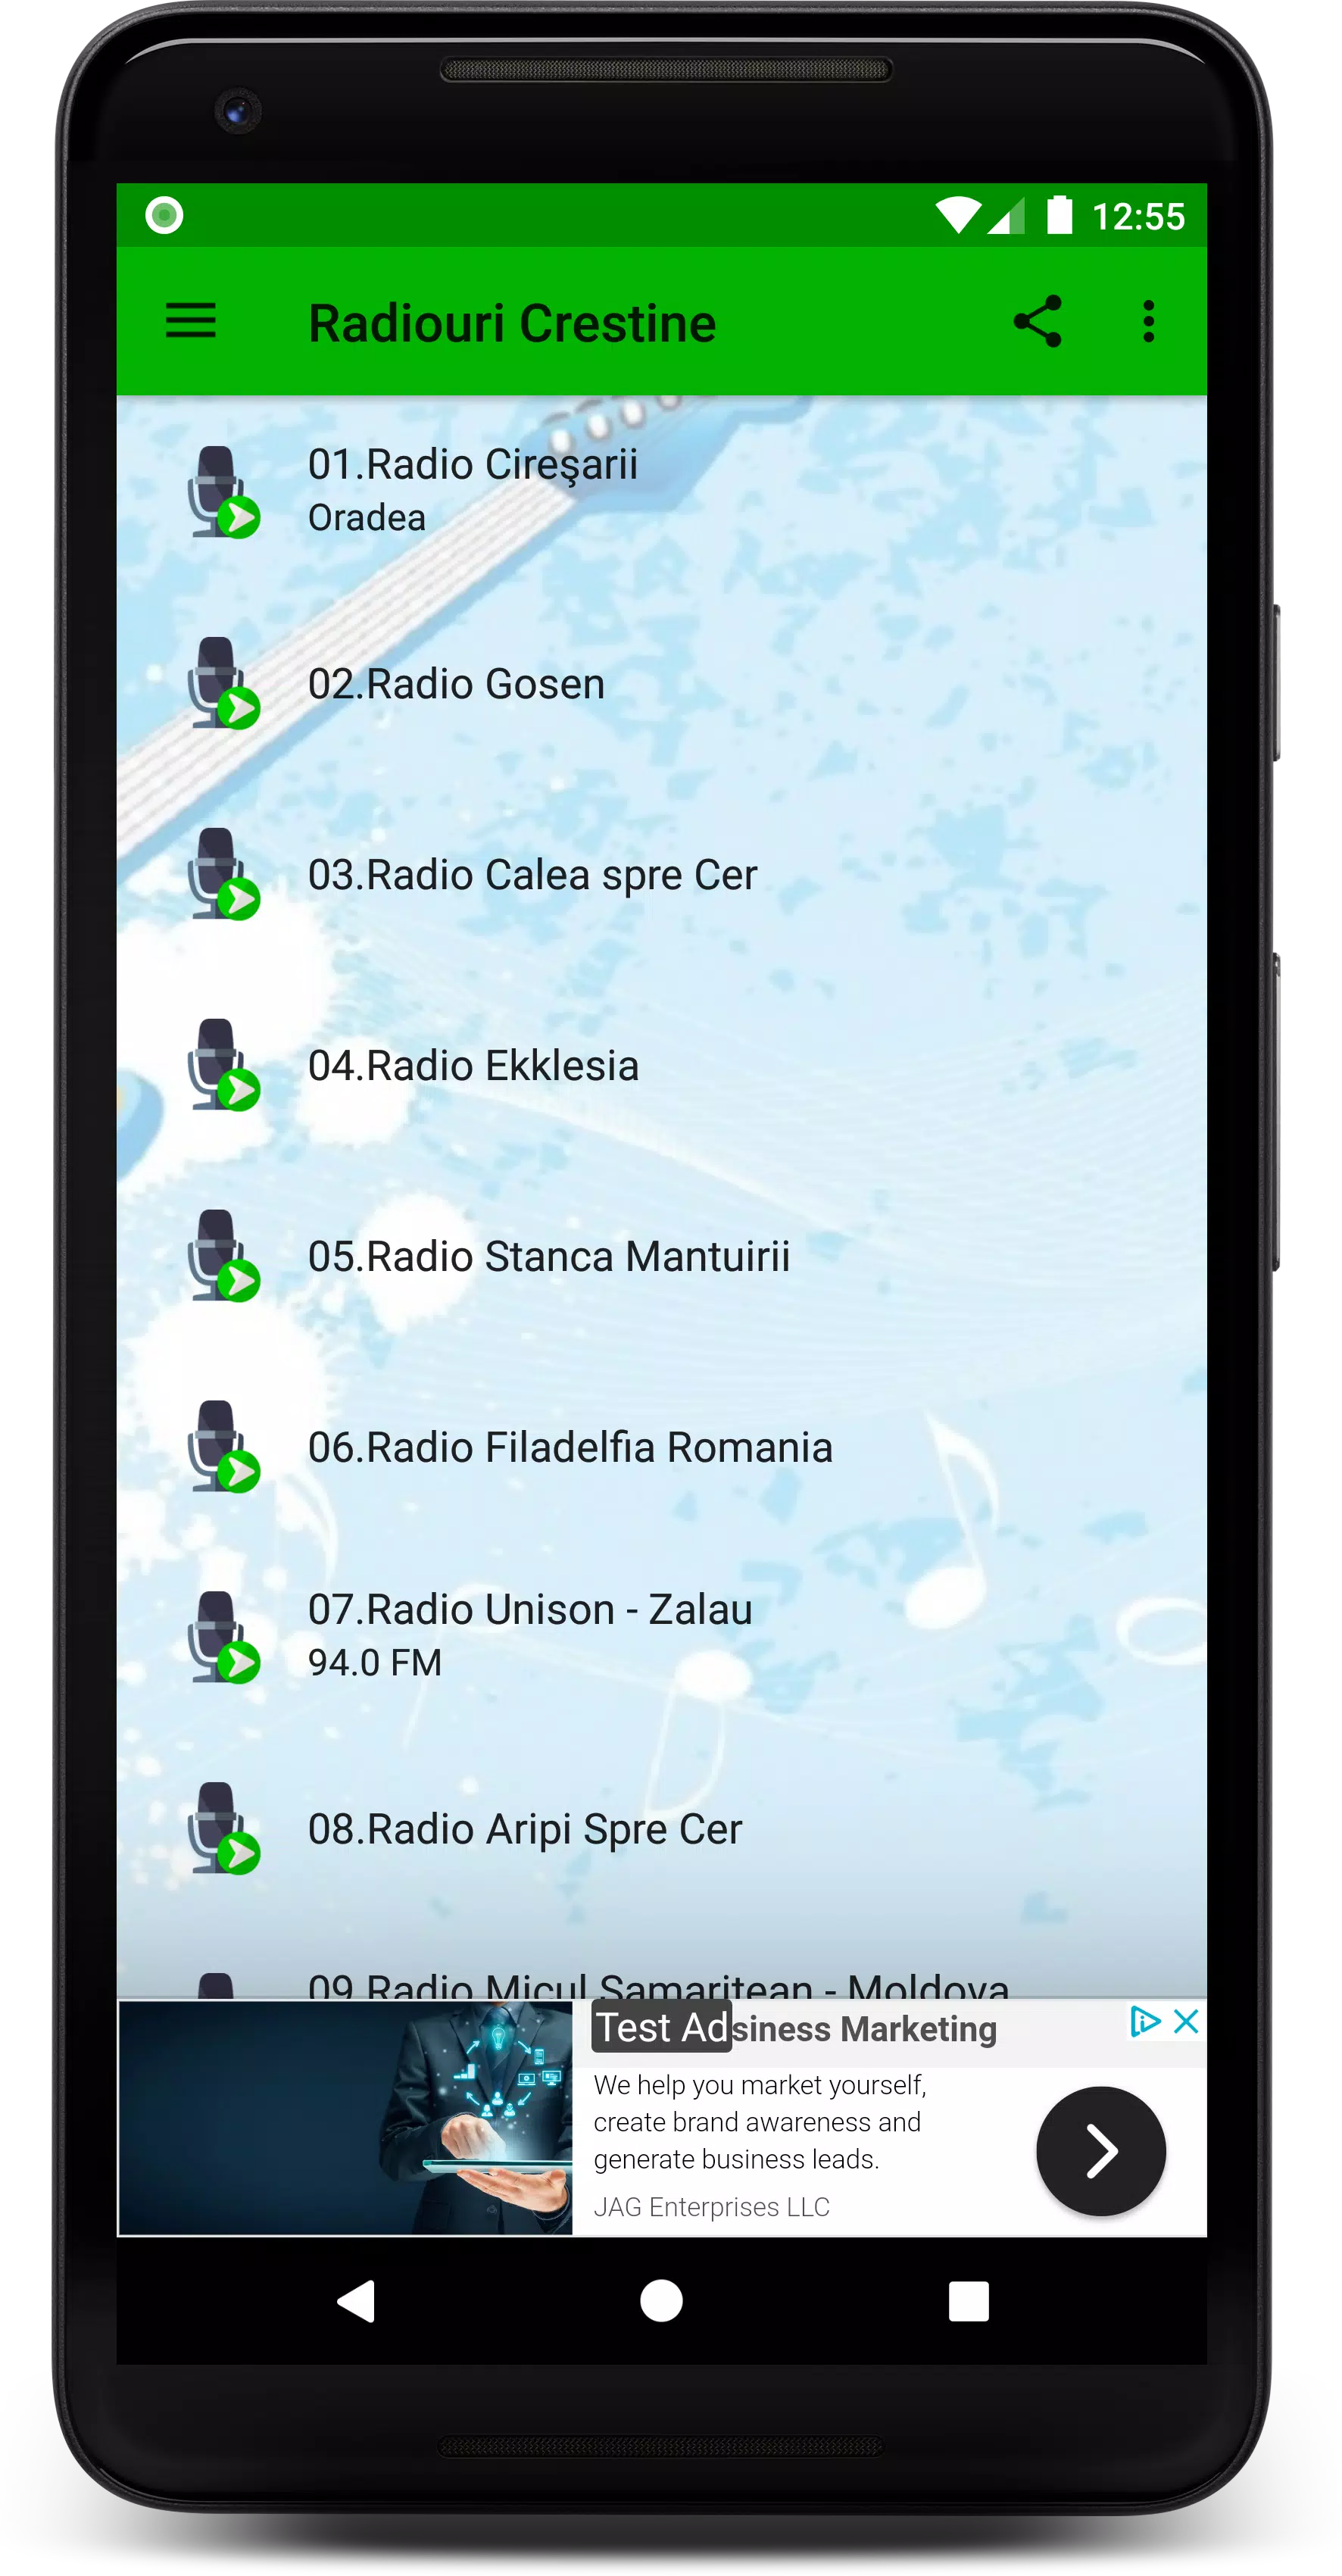 Radiouri Crestine for Android - APK Download